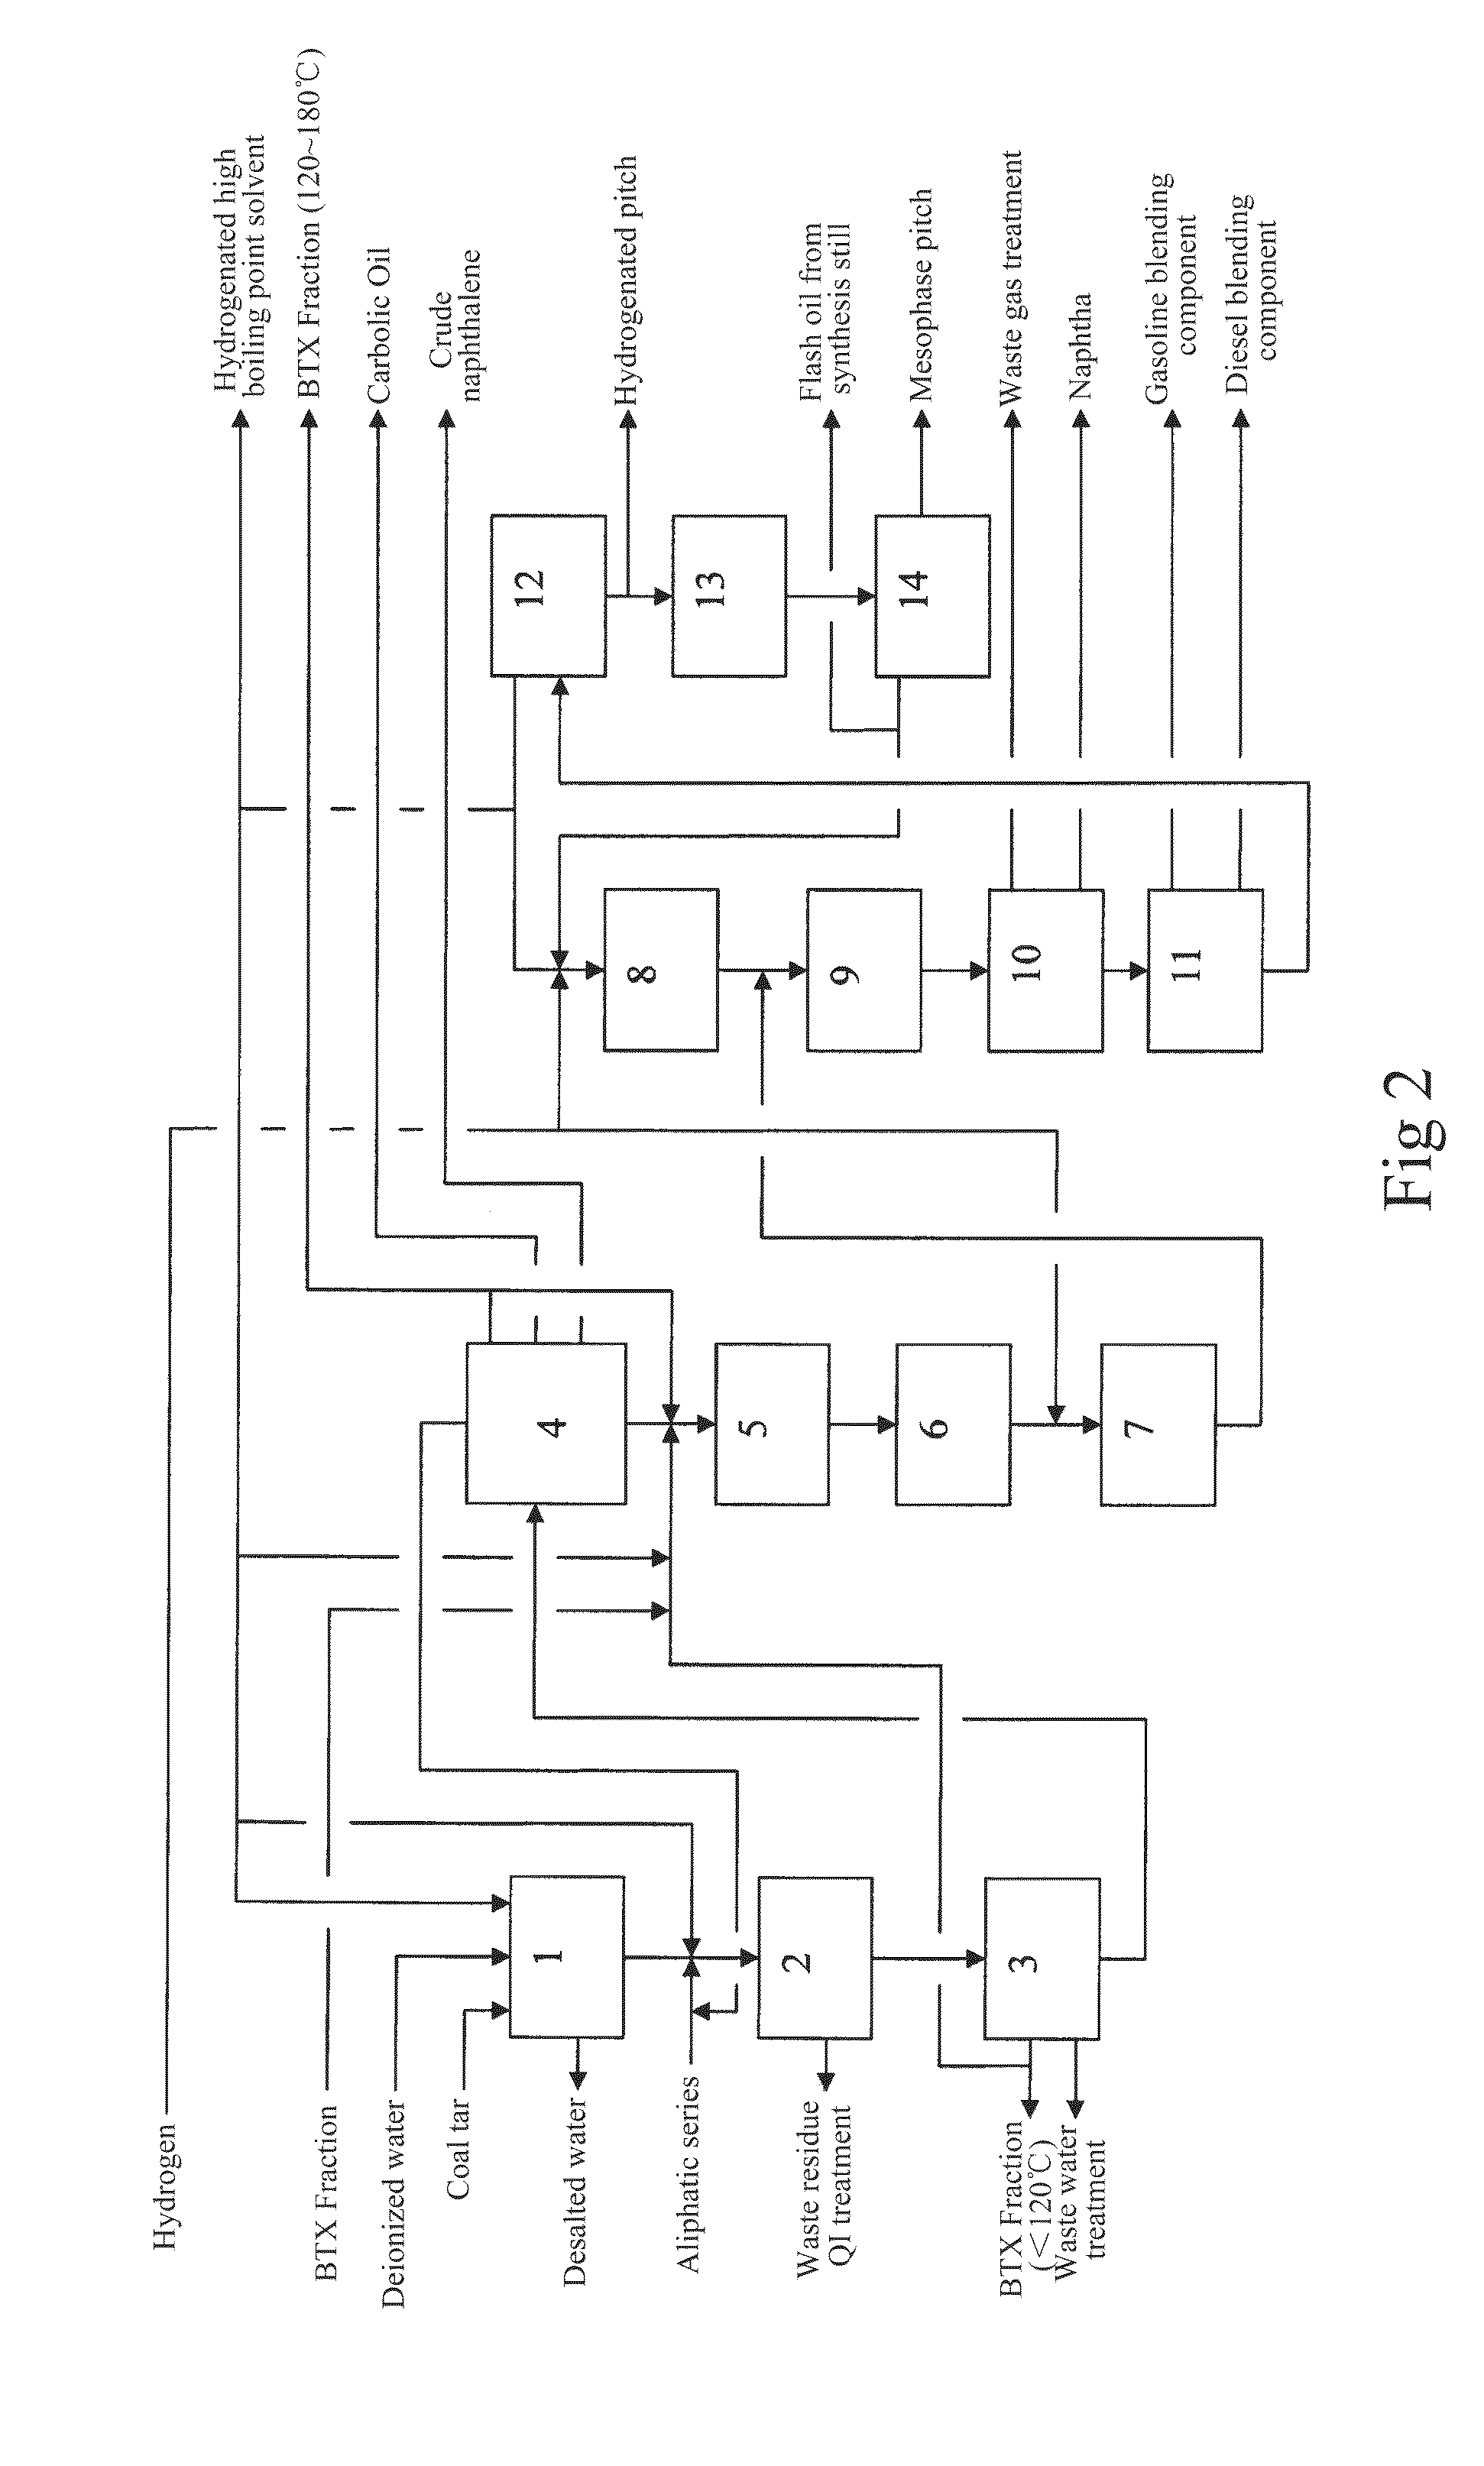 Process for Producing Mesophase Pitch by Hydrogenation of High-temperature Coal Tar